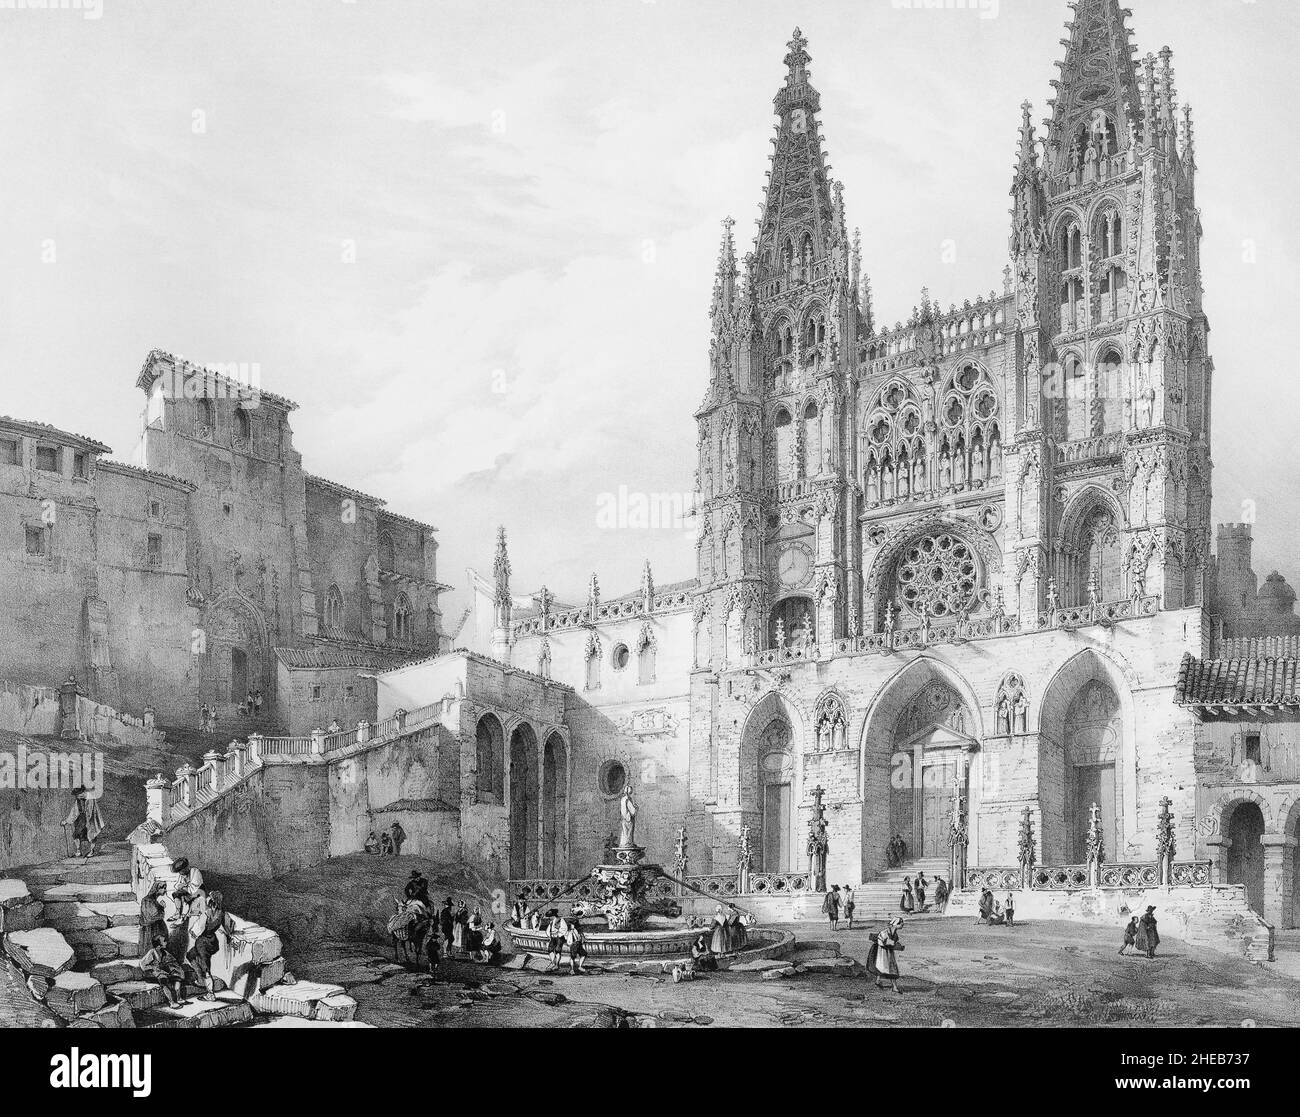 The main facade of the Gothic cathedral at Burgos, Burgos Province, Castile and Leon, Spain.  It was built during the 13th to 15th centuries and is a designated UNESCO World Heritage Site.  After a lithograph published in 1844 by Charles Claude Bachelier from a drawing by Genaro Pérez Villaamil y Duguet. Stock Photo